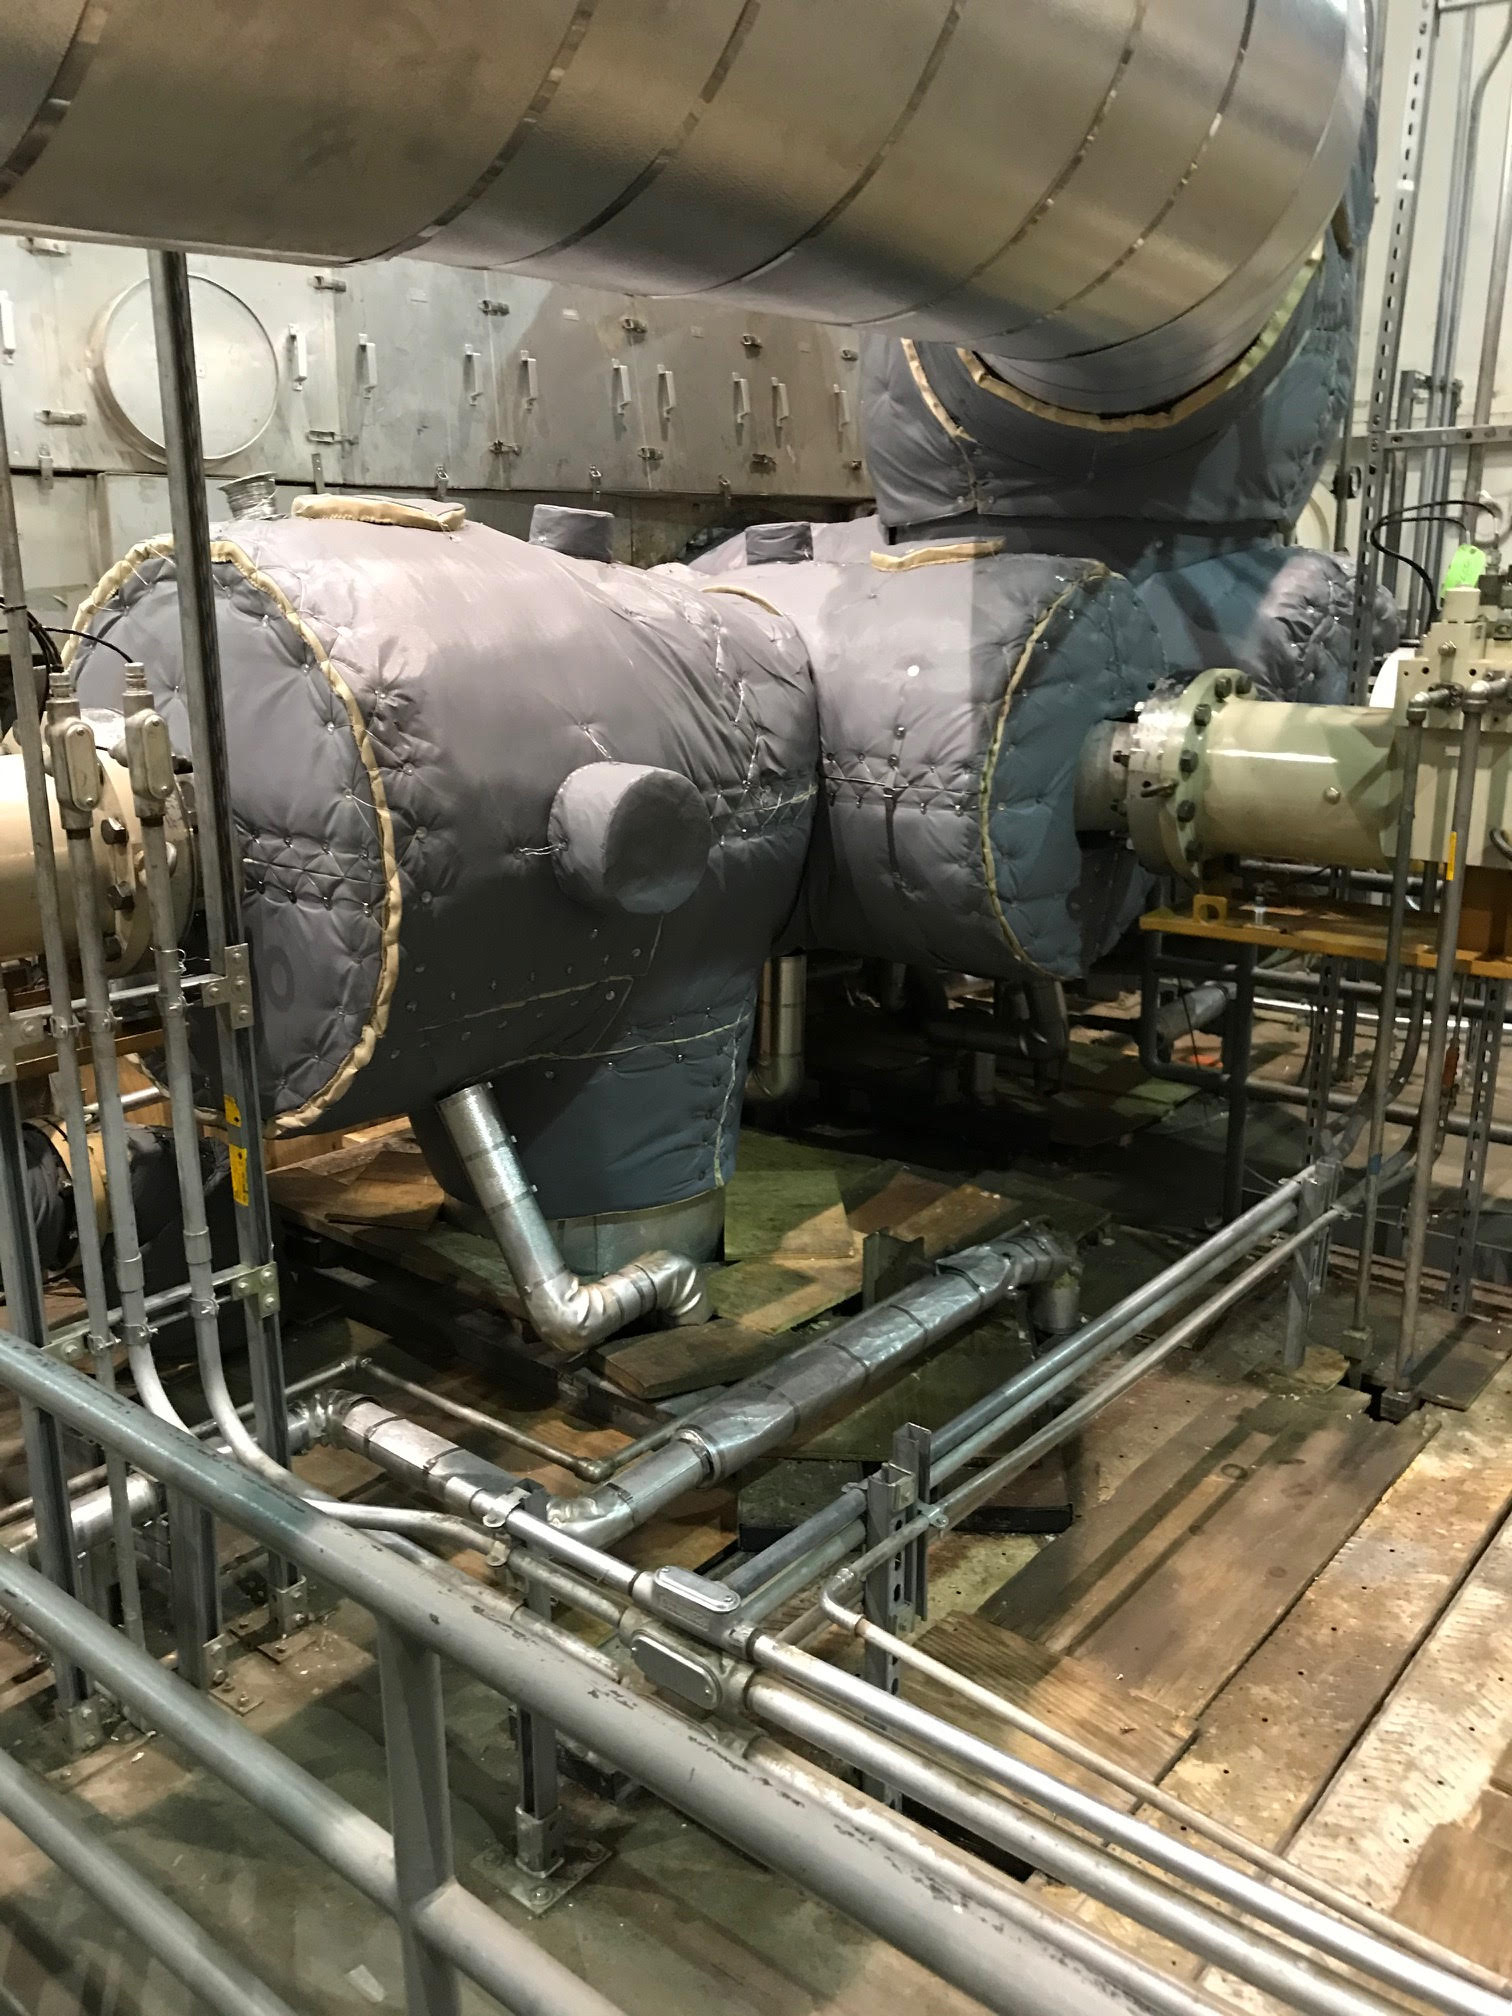 Pipe Insulation on an electical turbine